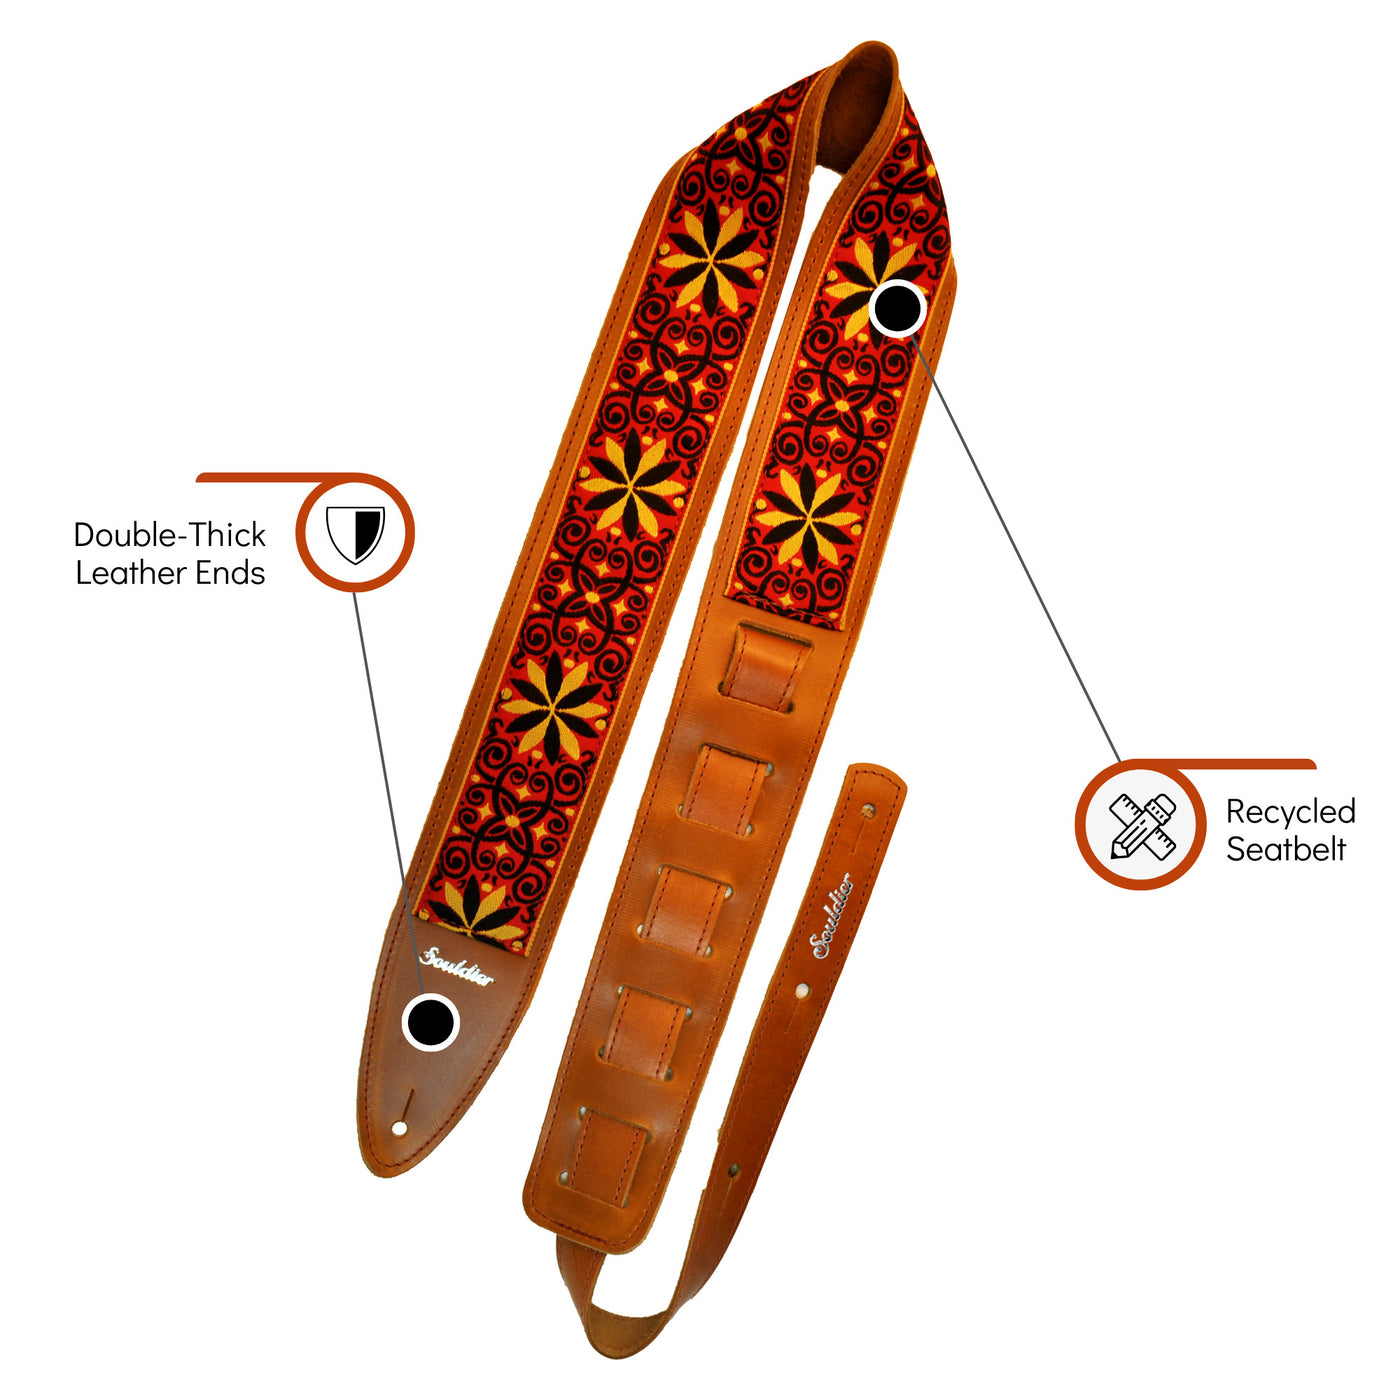 Souldier TGS1149RS02RS - Handmade Souldier Fabric Torpedo Strap for Bass, Electric, or Acoustic Guitar, Adjustable Length from 42.5" to 55" Made in the USA, Gypsy